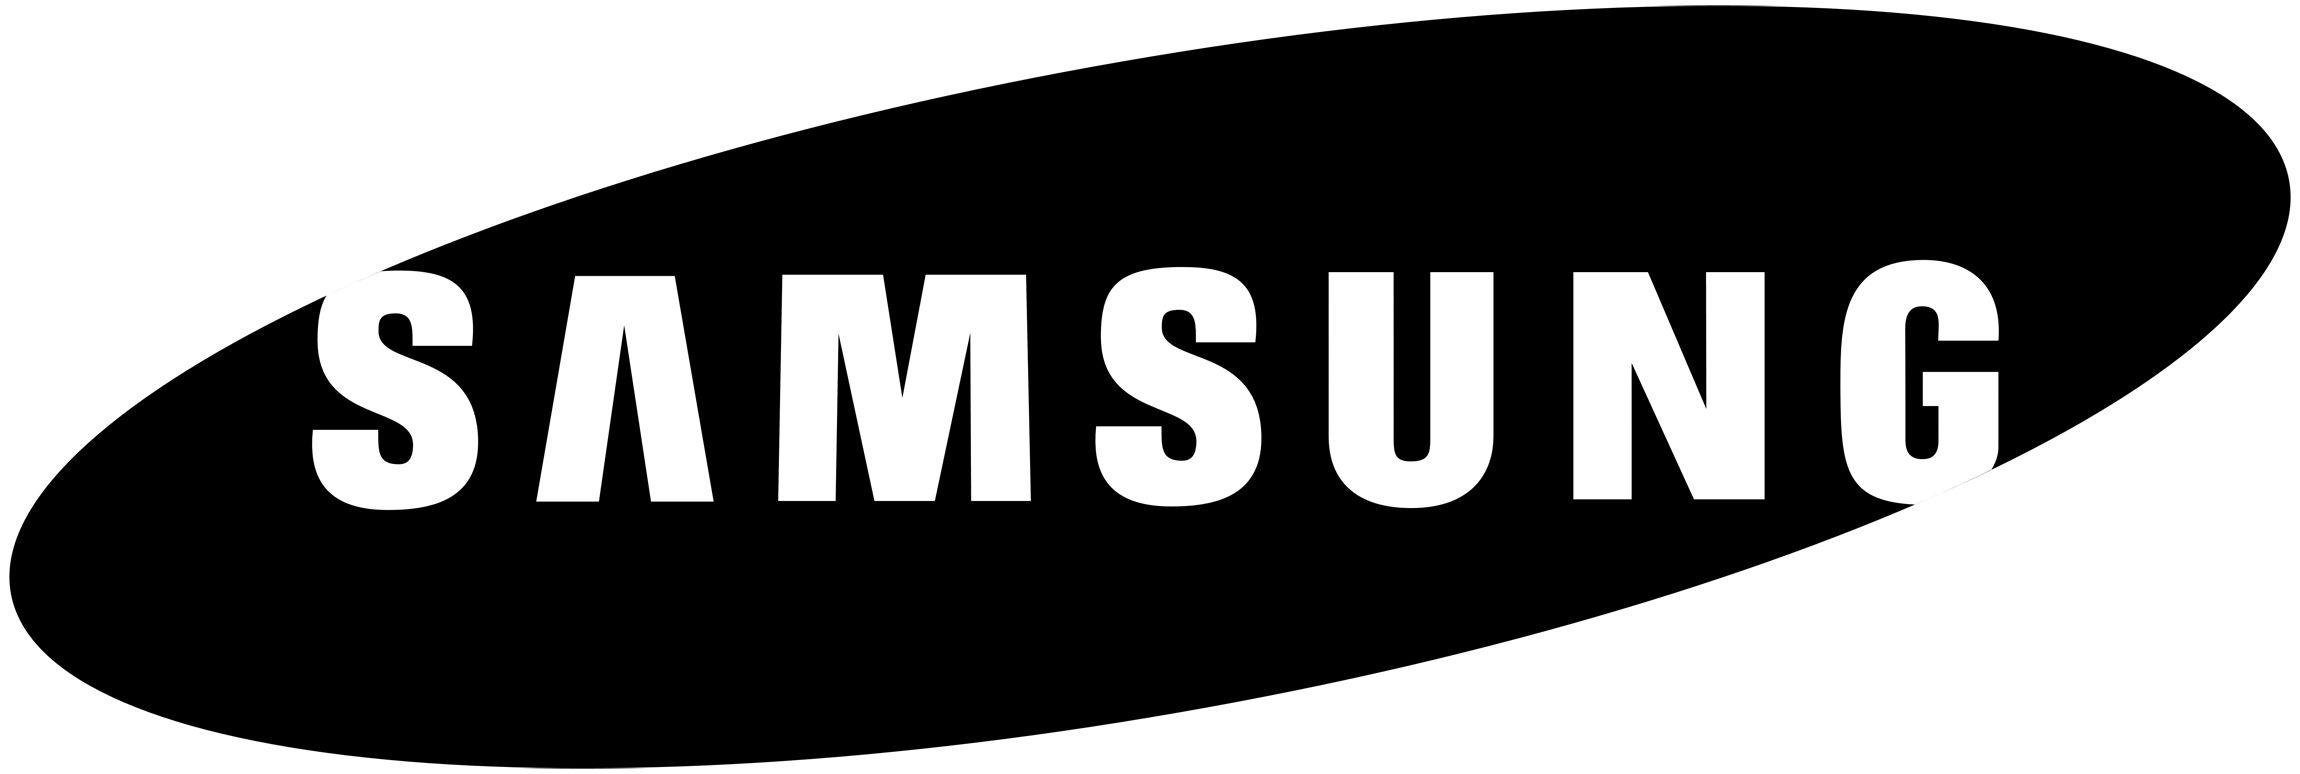 New Samsung 2017 Logo - Samsung Logo, Samsung Symbol, Meaning, History and Evolution